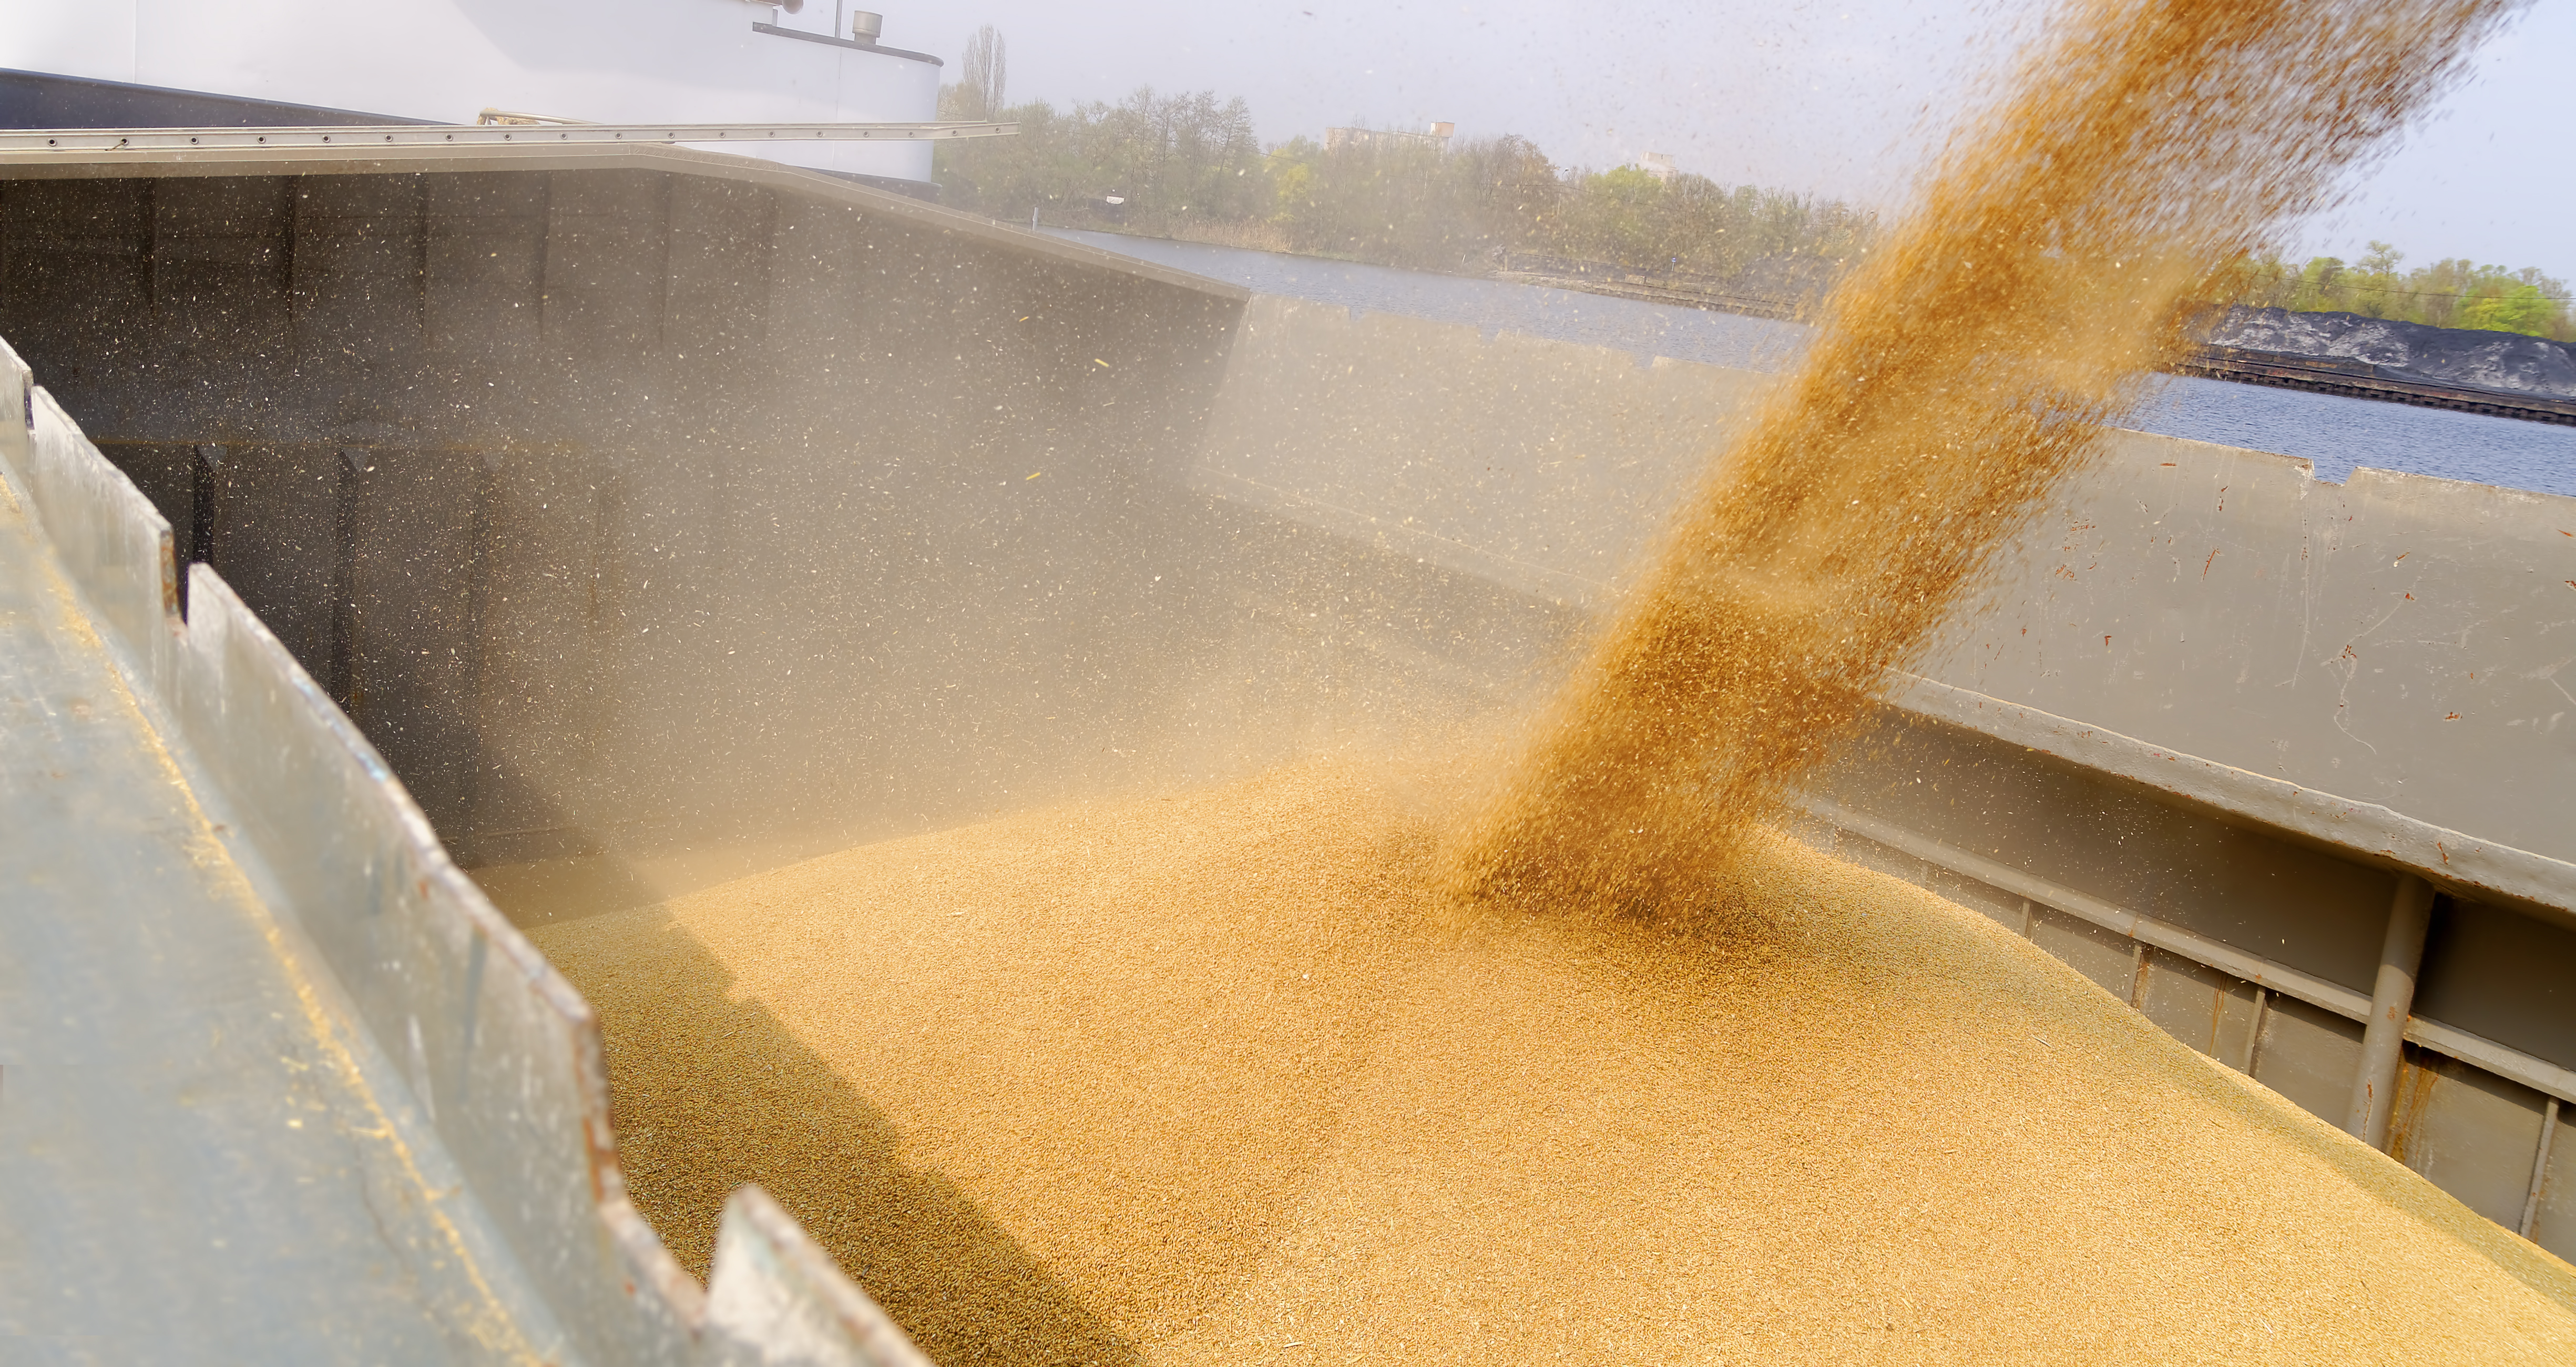 Loading Barge With A Crop Of Wheat Grain